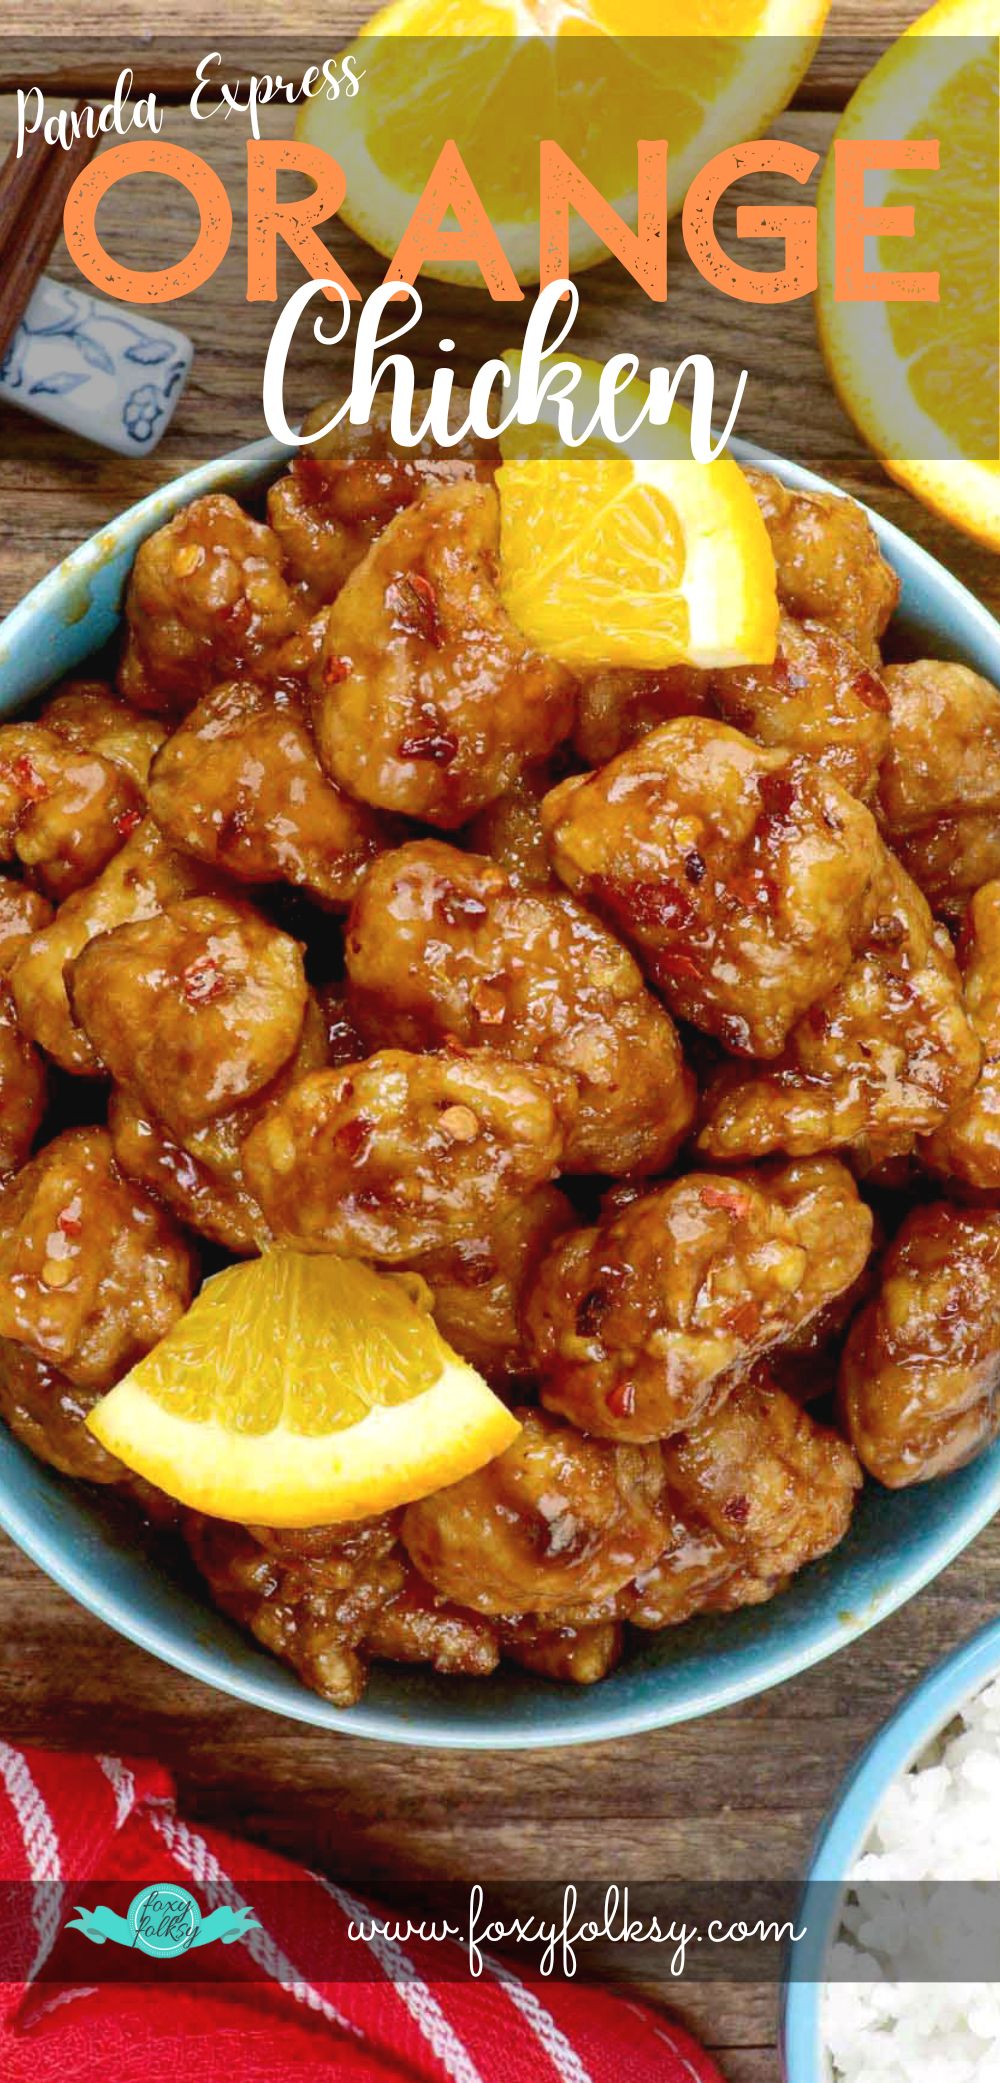 Orange Chicken in a serving bowl served with steamed rice.